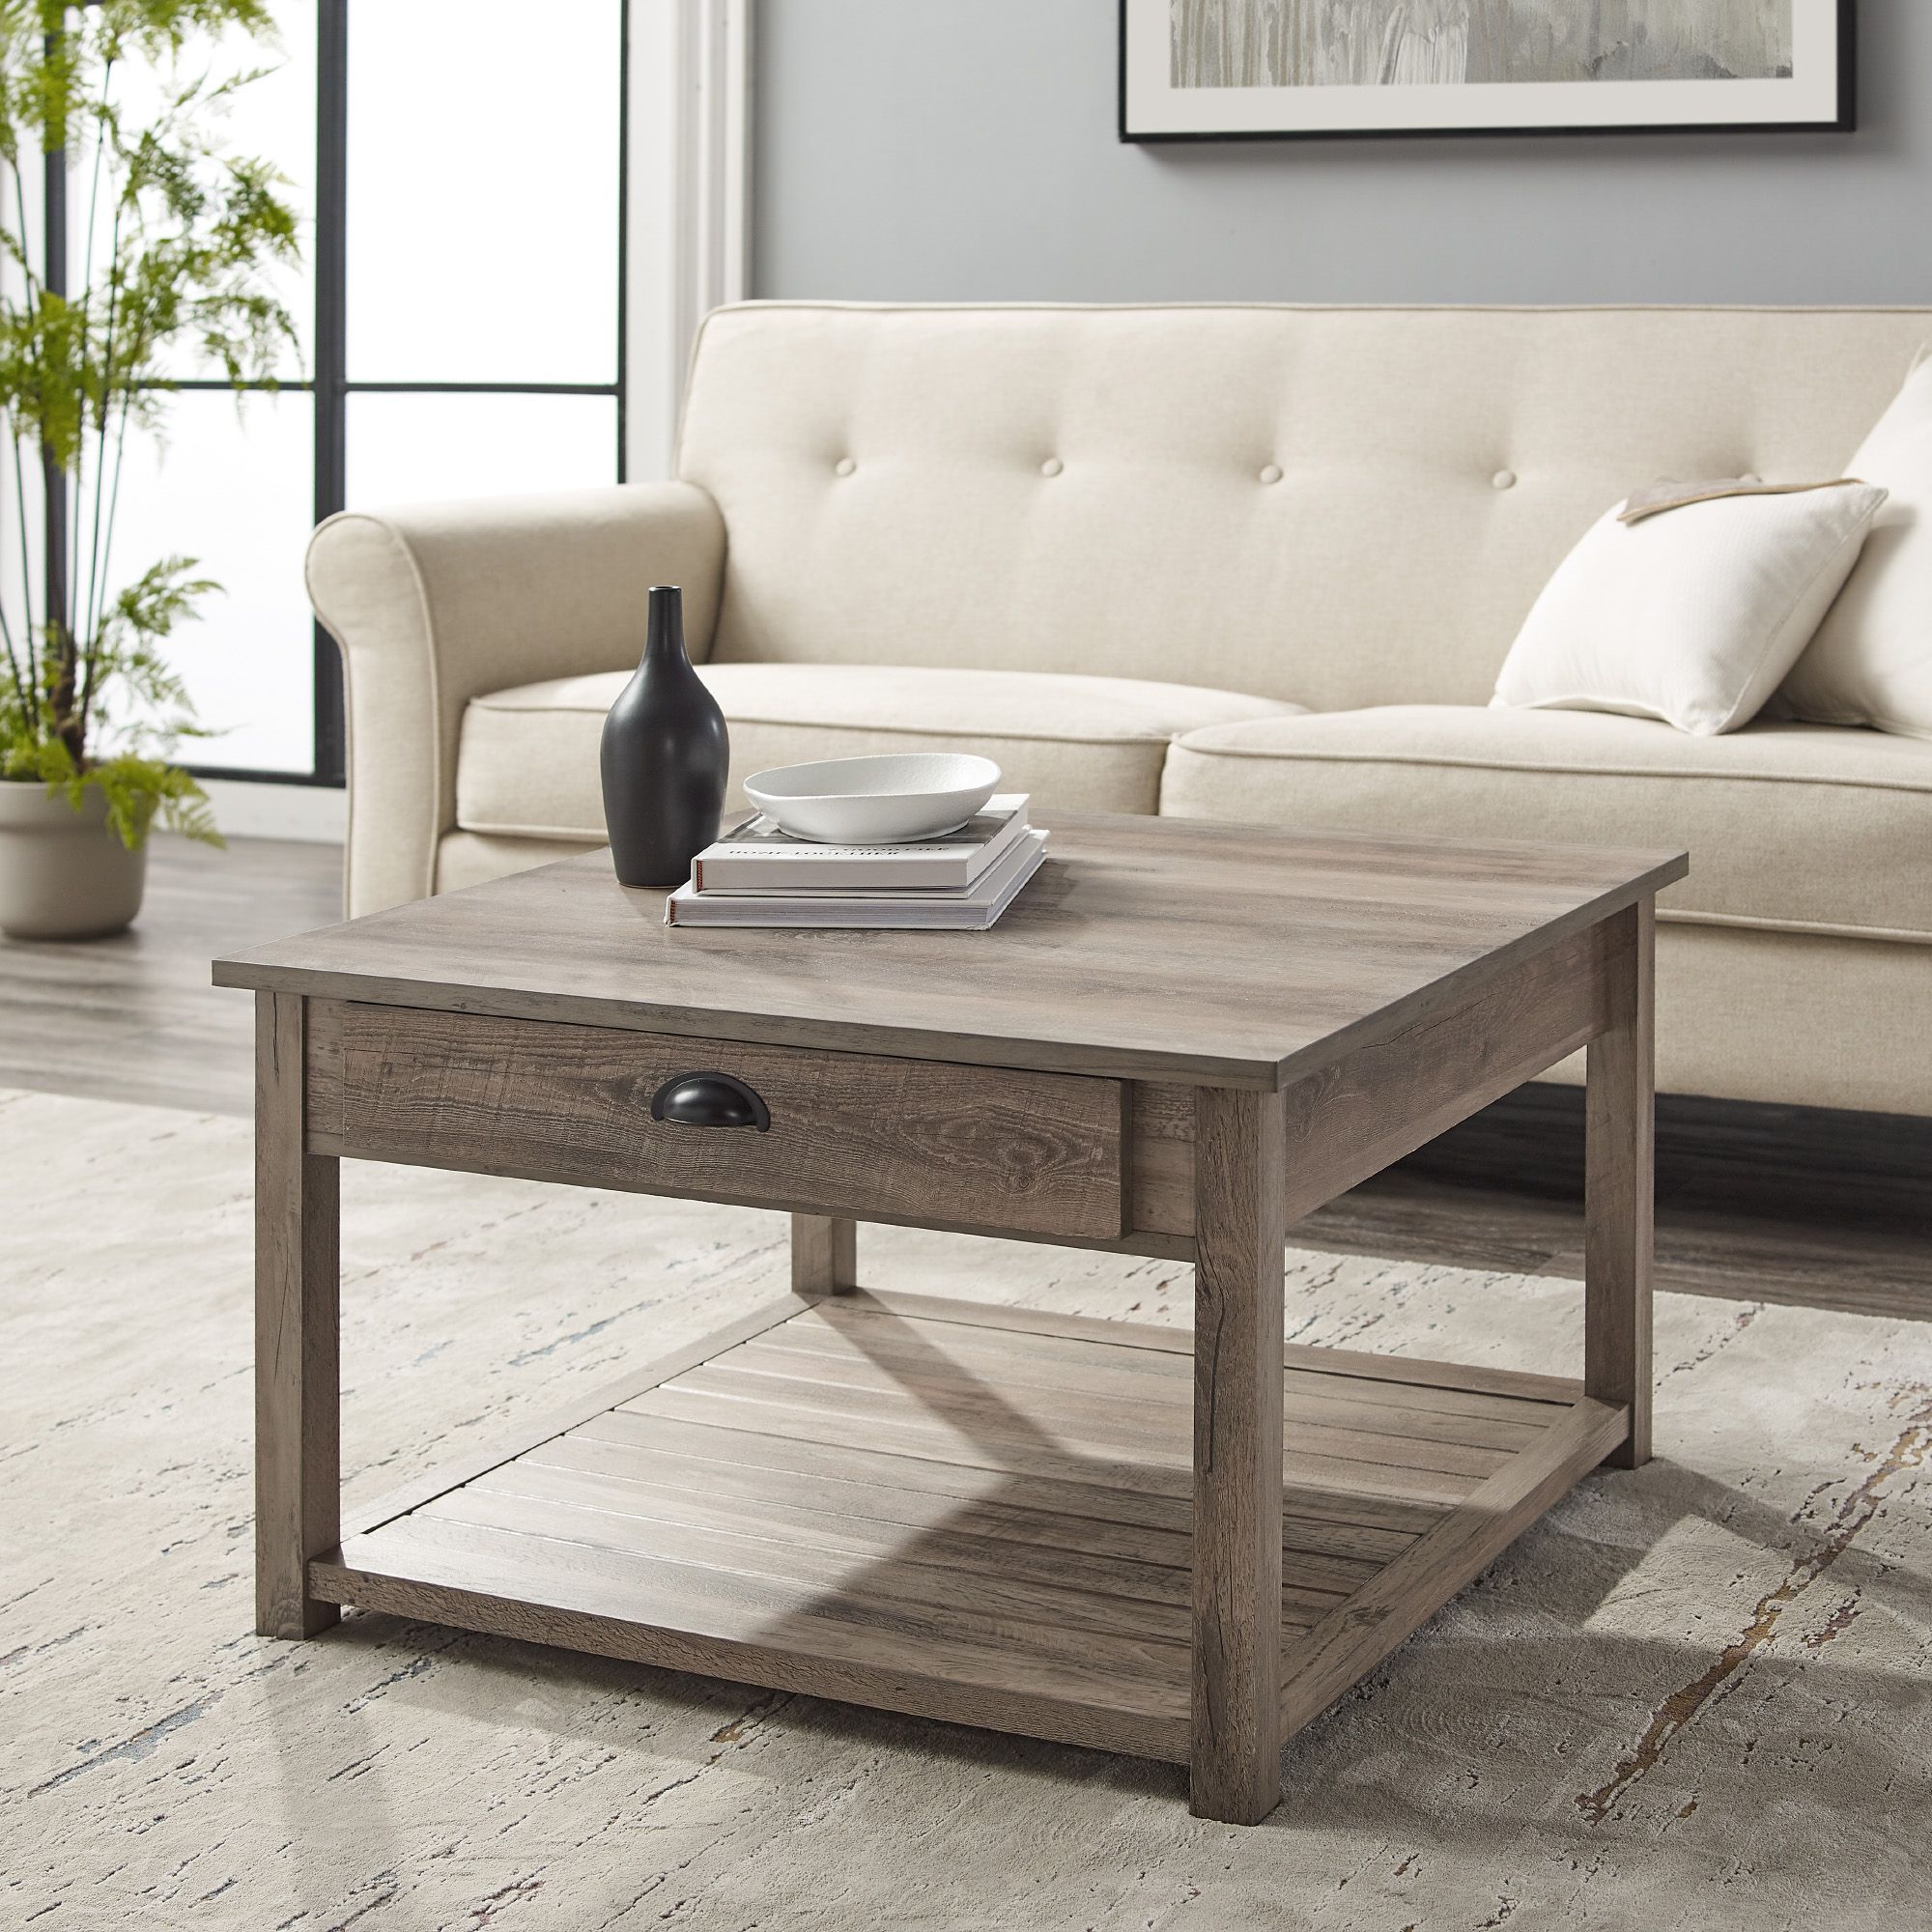 Gray Wash Coffee Tables Regarding Widely Used Manor Park 30 Inch Square Country Coffee Table, Grey Wash – Walmart (View 3 of 10)